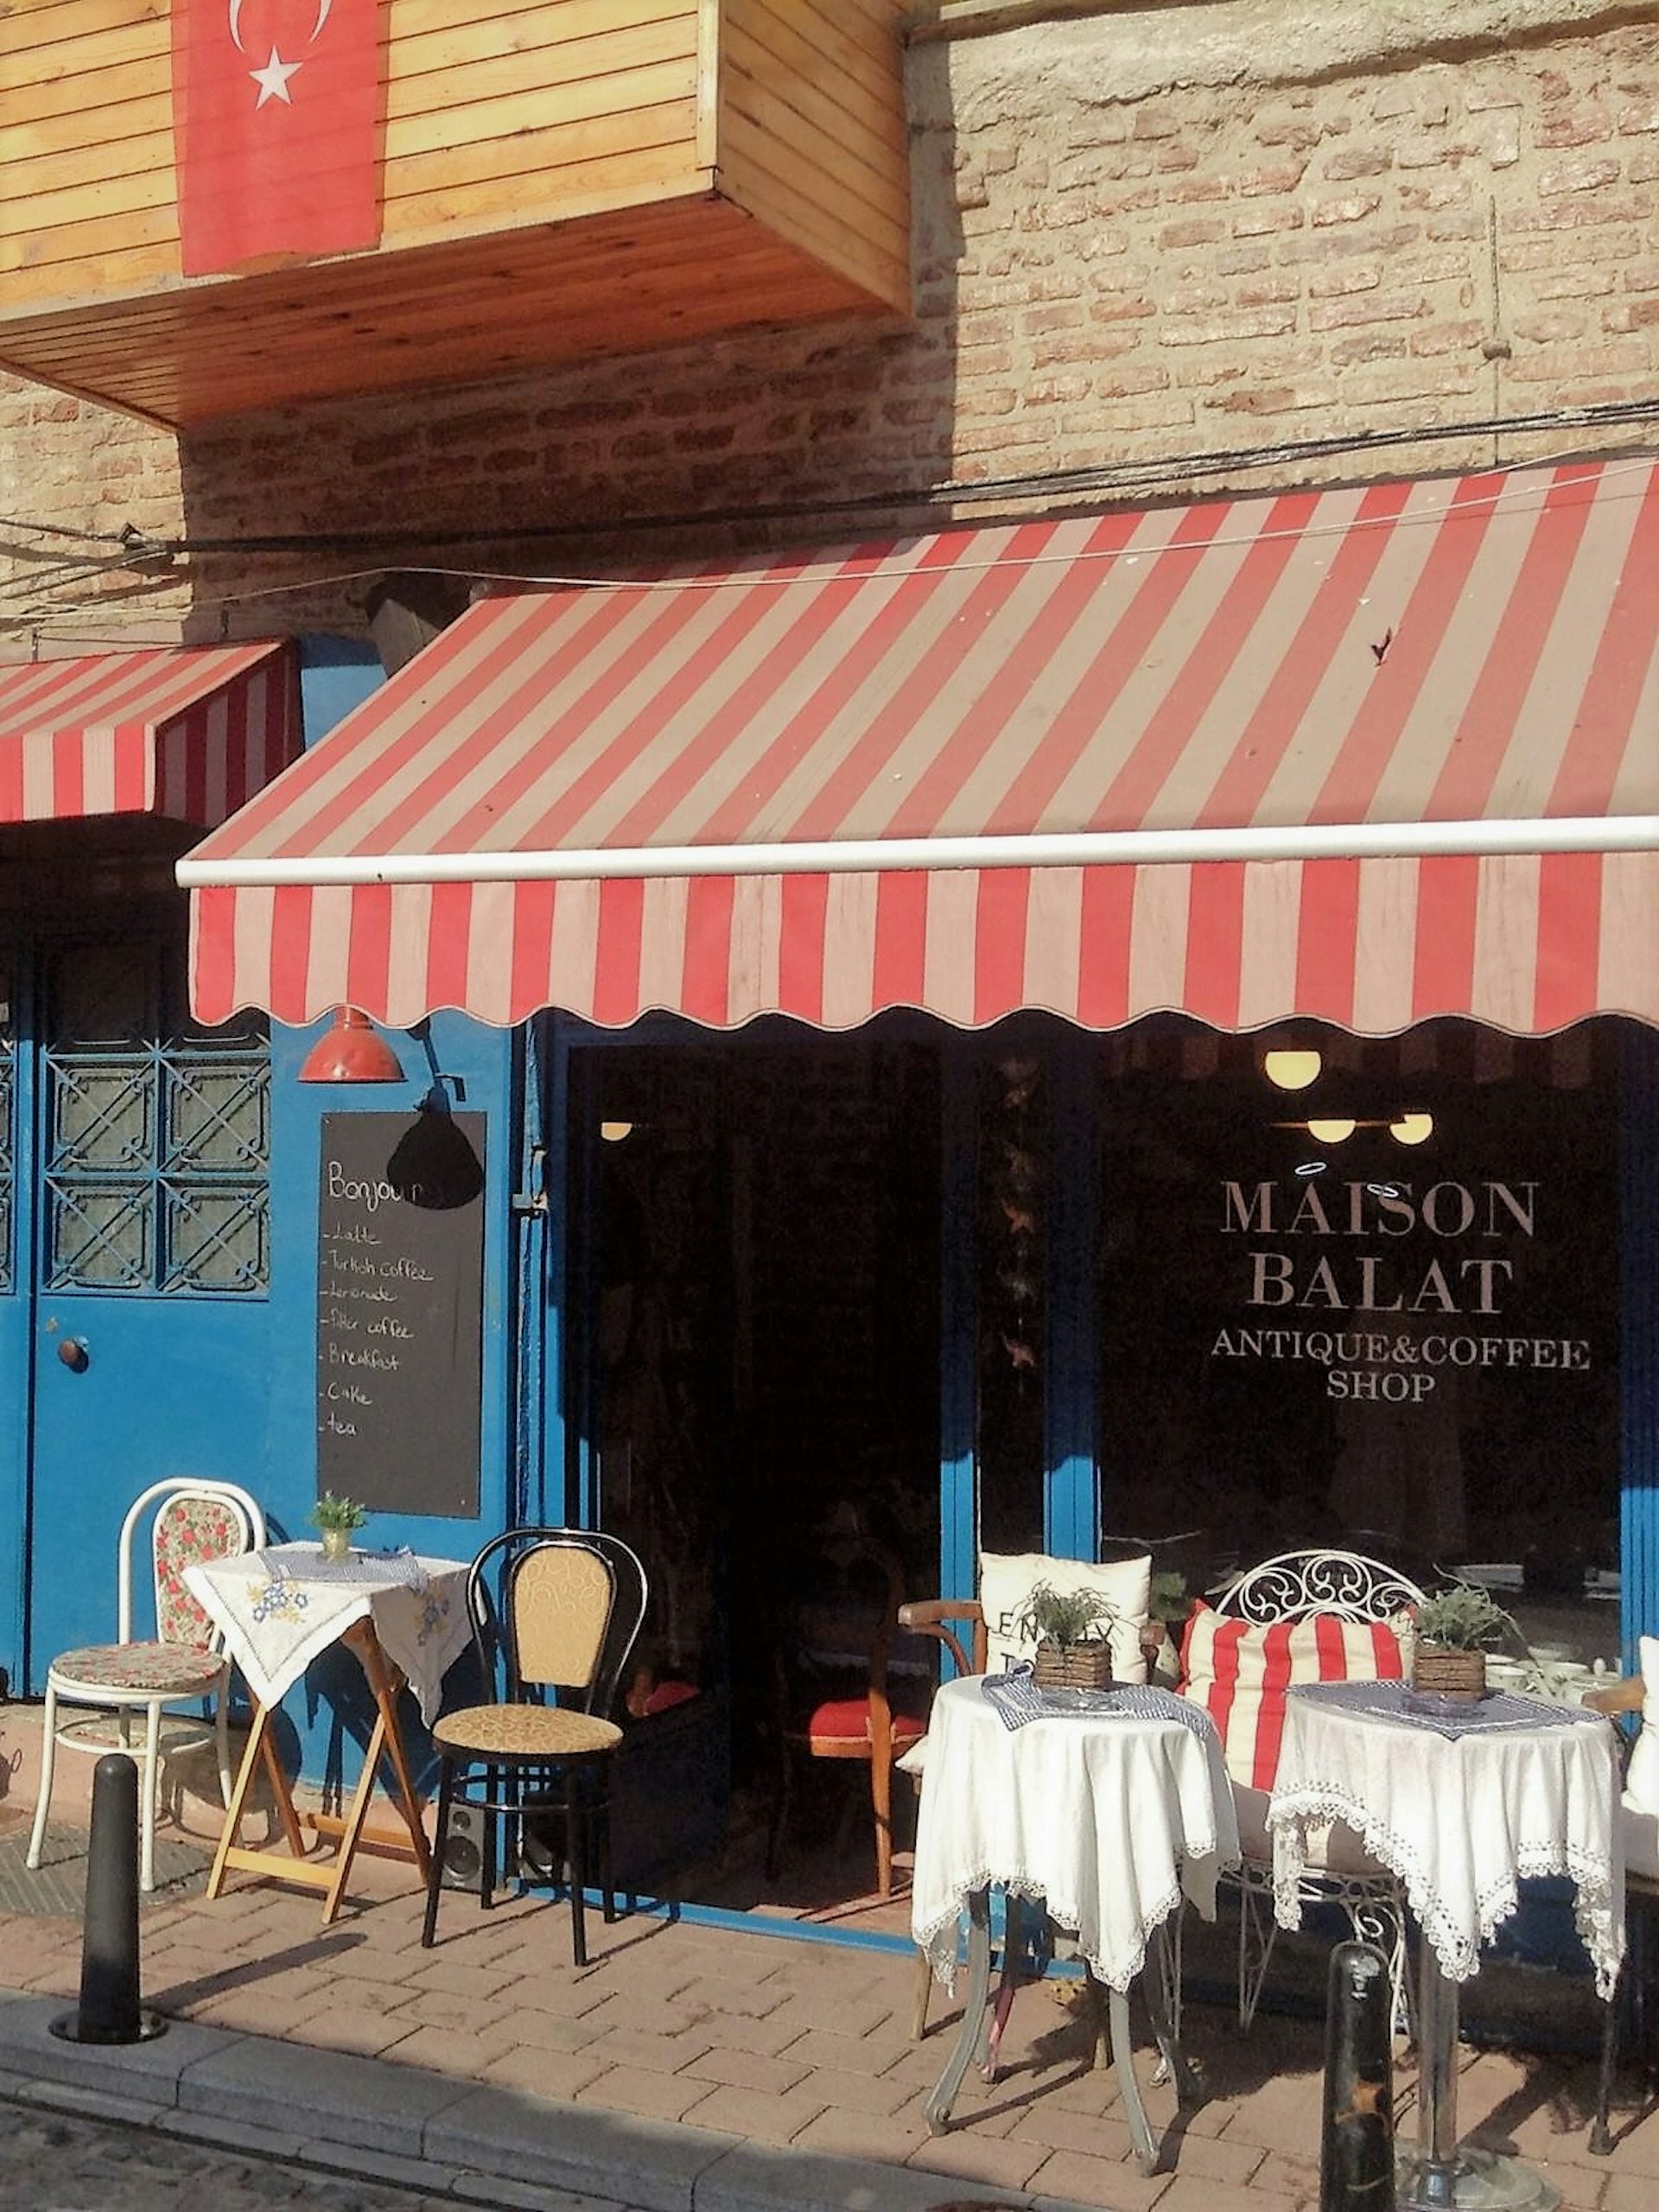 A french cafe and antiques shop with a vibrant, primary colour blue facade and a red and white striped awning. Mismatched chairs and table with delicate tablecloths sit outside on a sunny day in front of the glass shopfront window displaying the name 'Maison Balat' © Jennifer Hattam / Lonely Planet